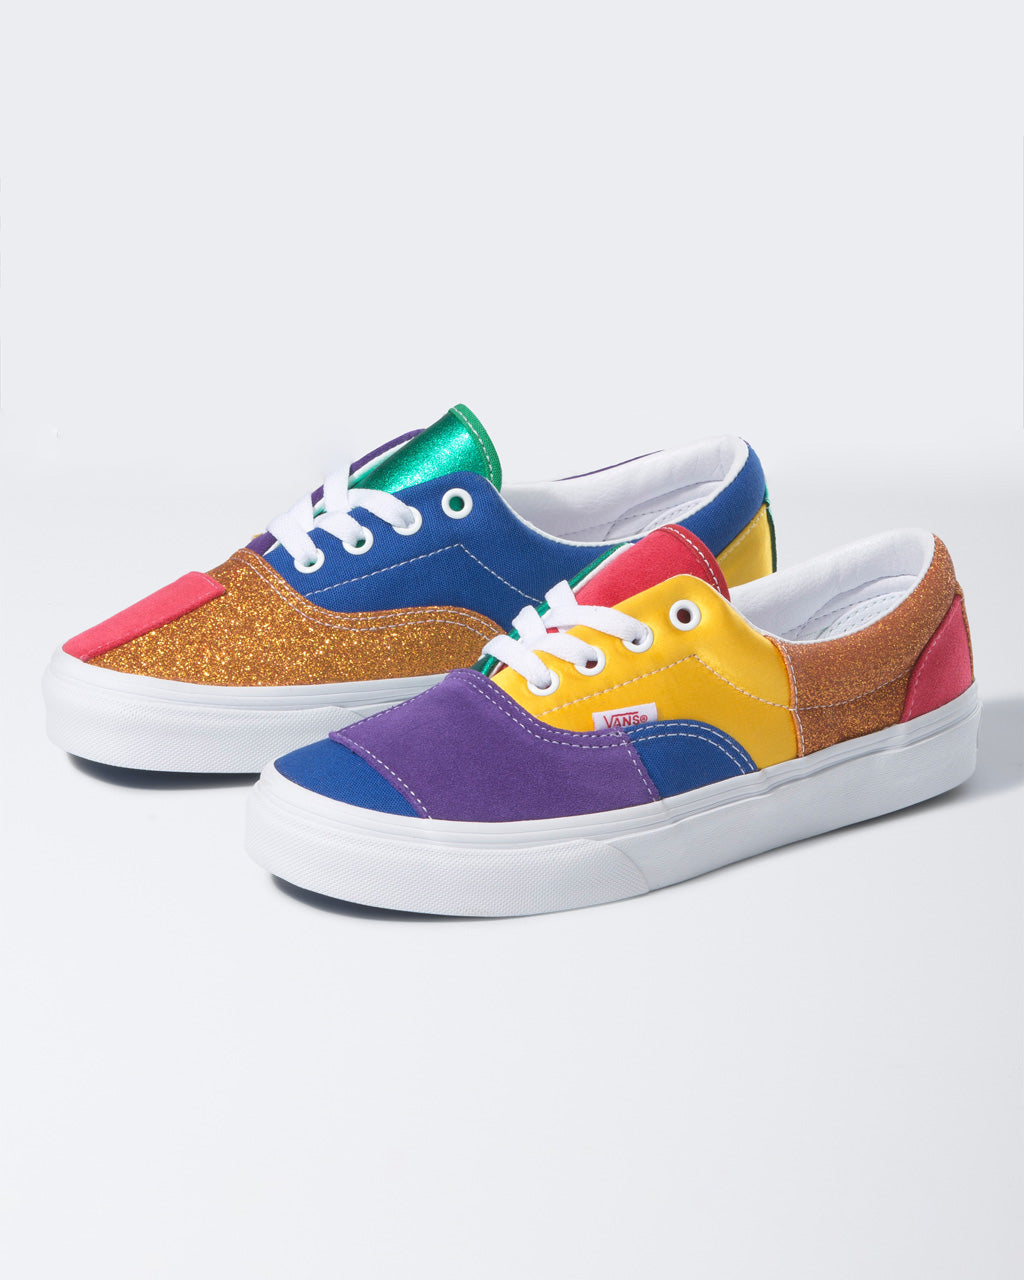 Pride - Patchwork/True White by vans shoes -